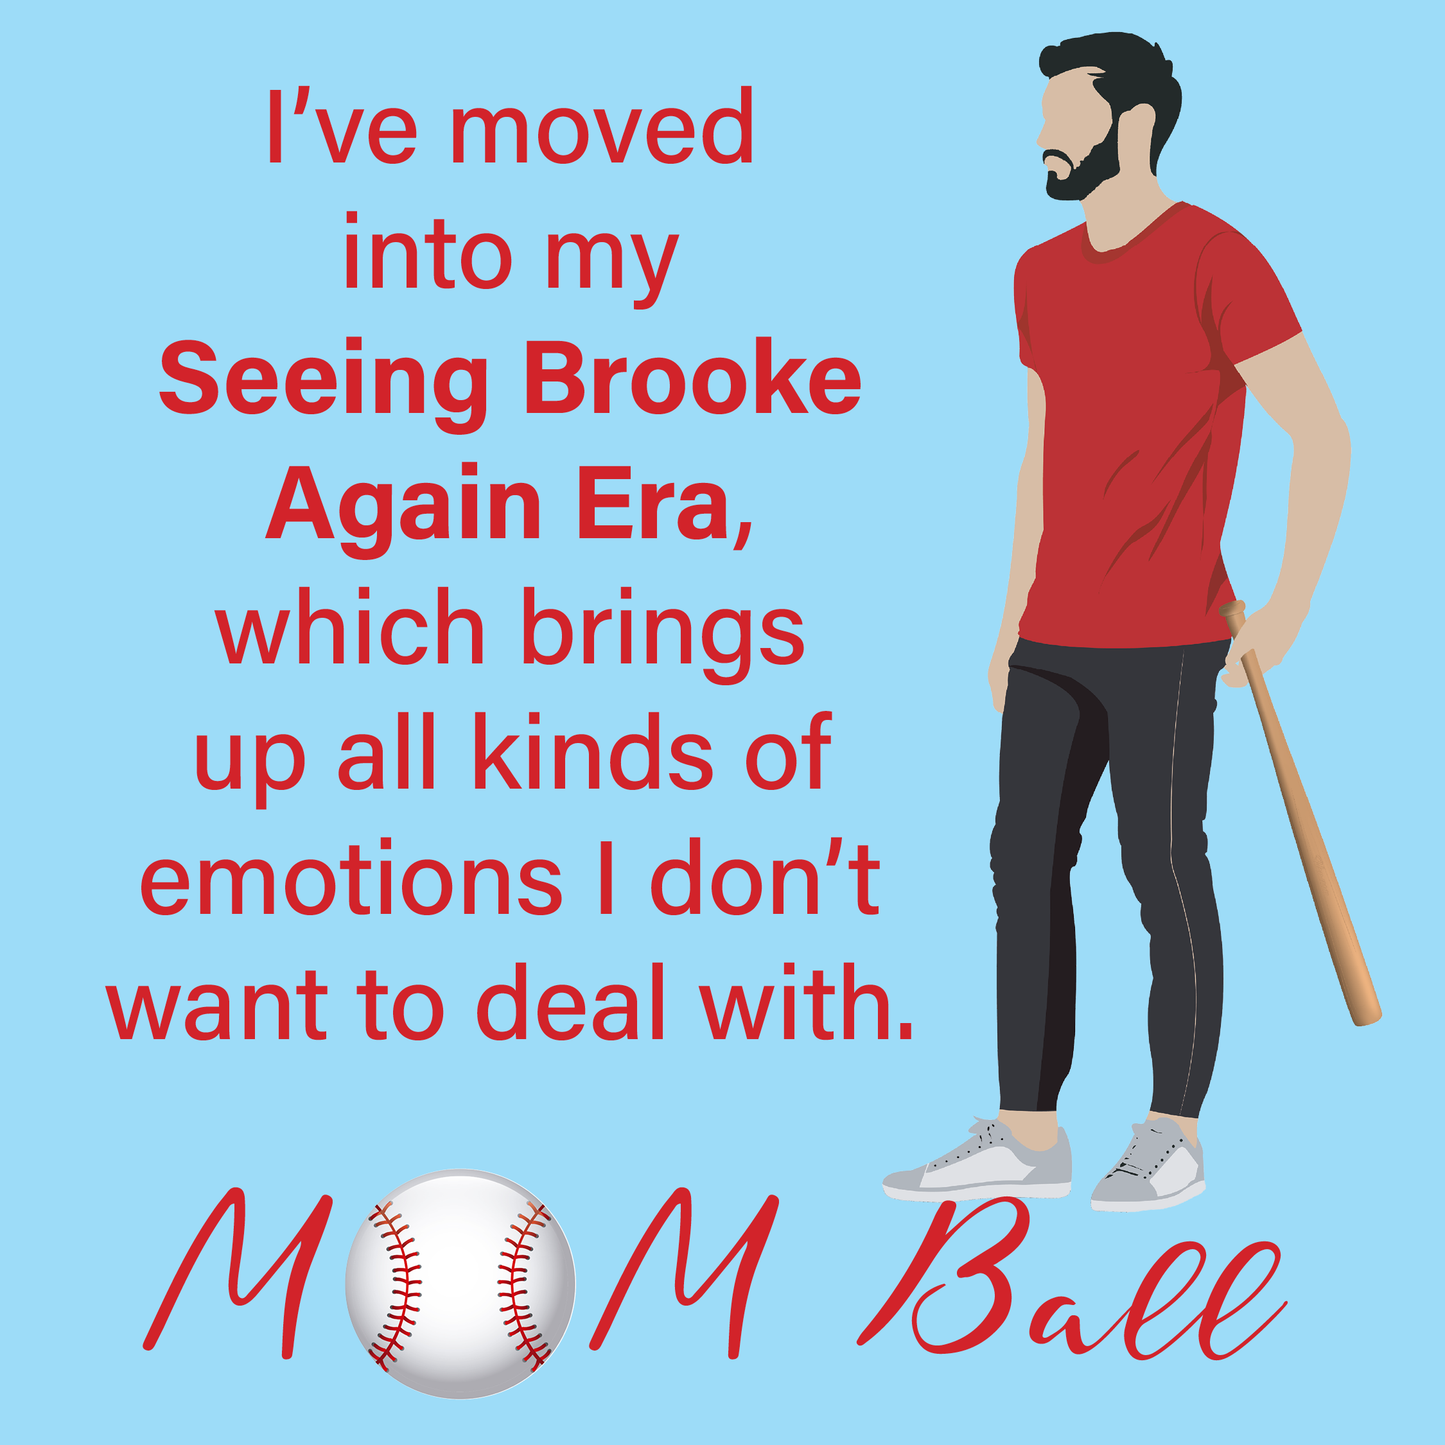 ⭐PREORDER⭐ Mom Ball: A Sweet, Small Town Romantic Comedy